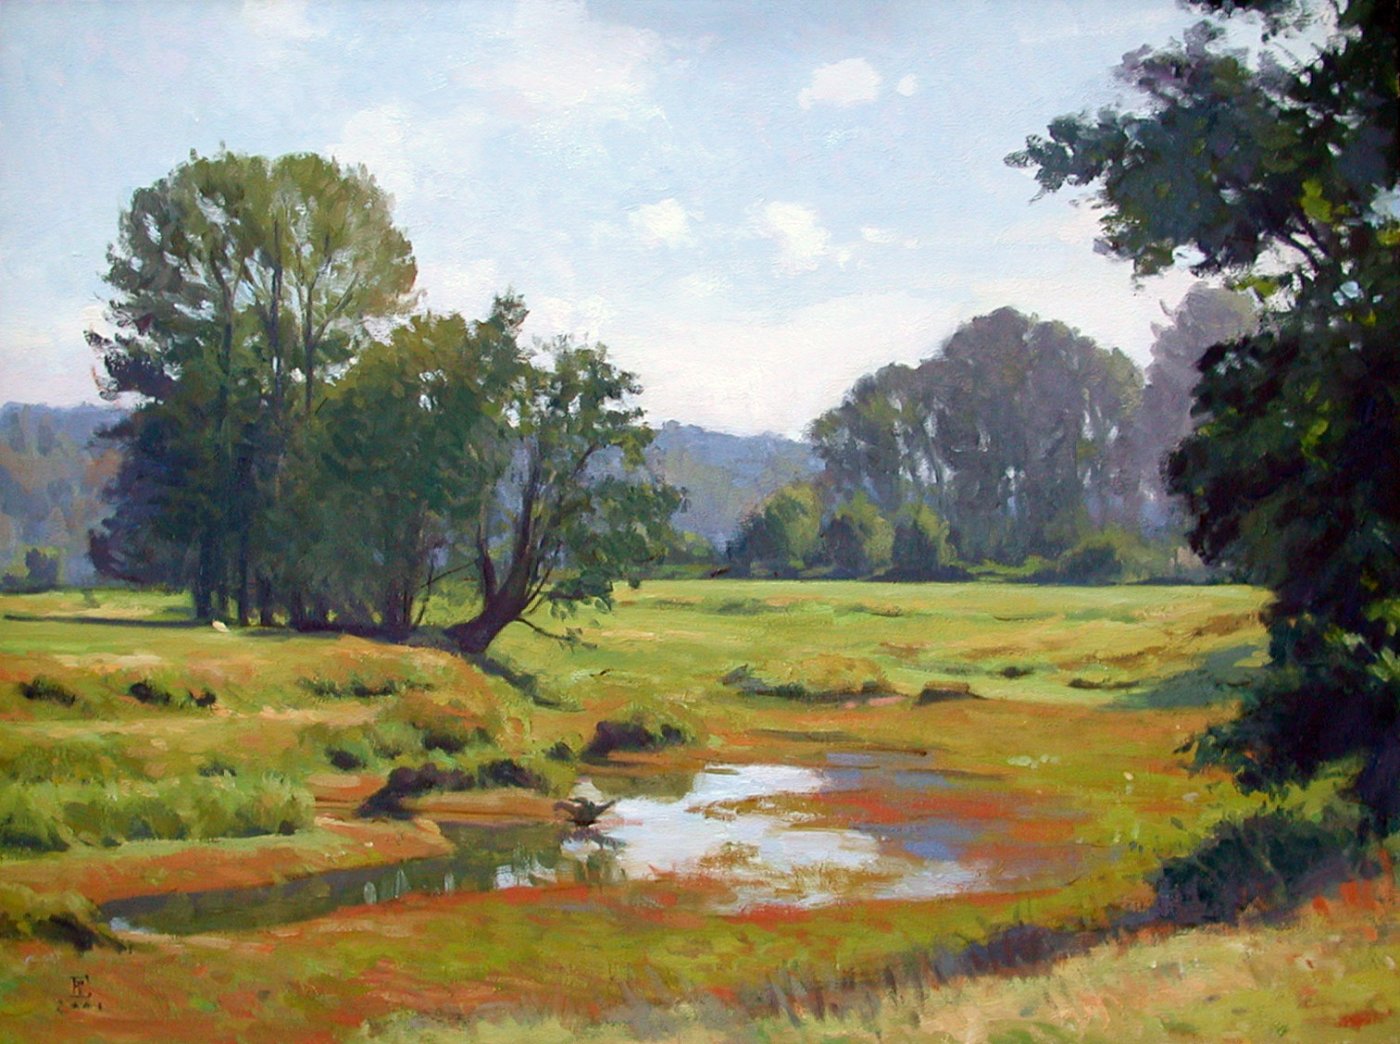 Riverbed II, oil on canvas, 24 X 32 inches, copyright ©2001